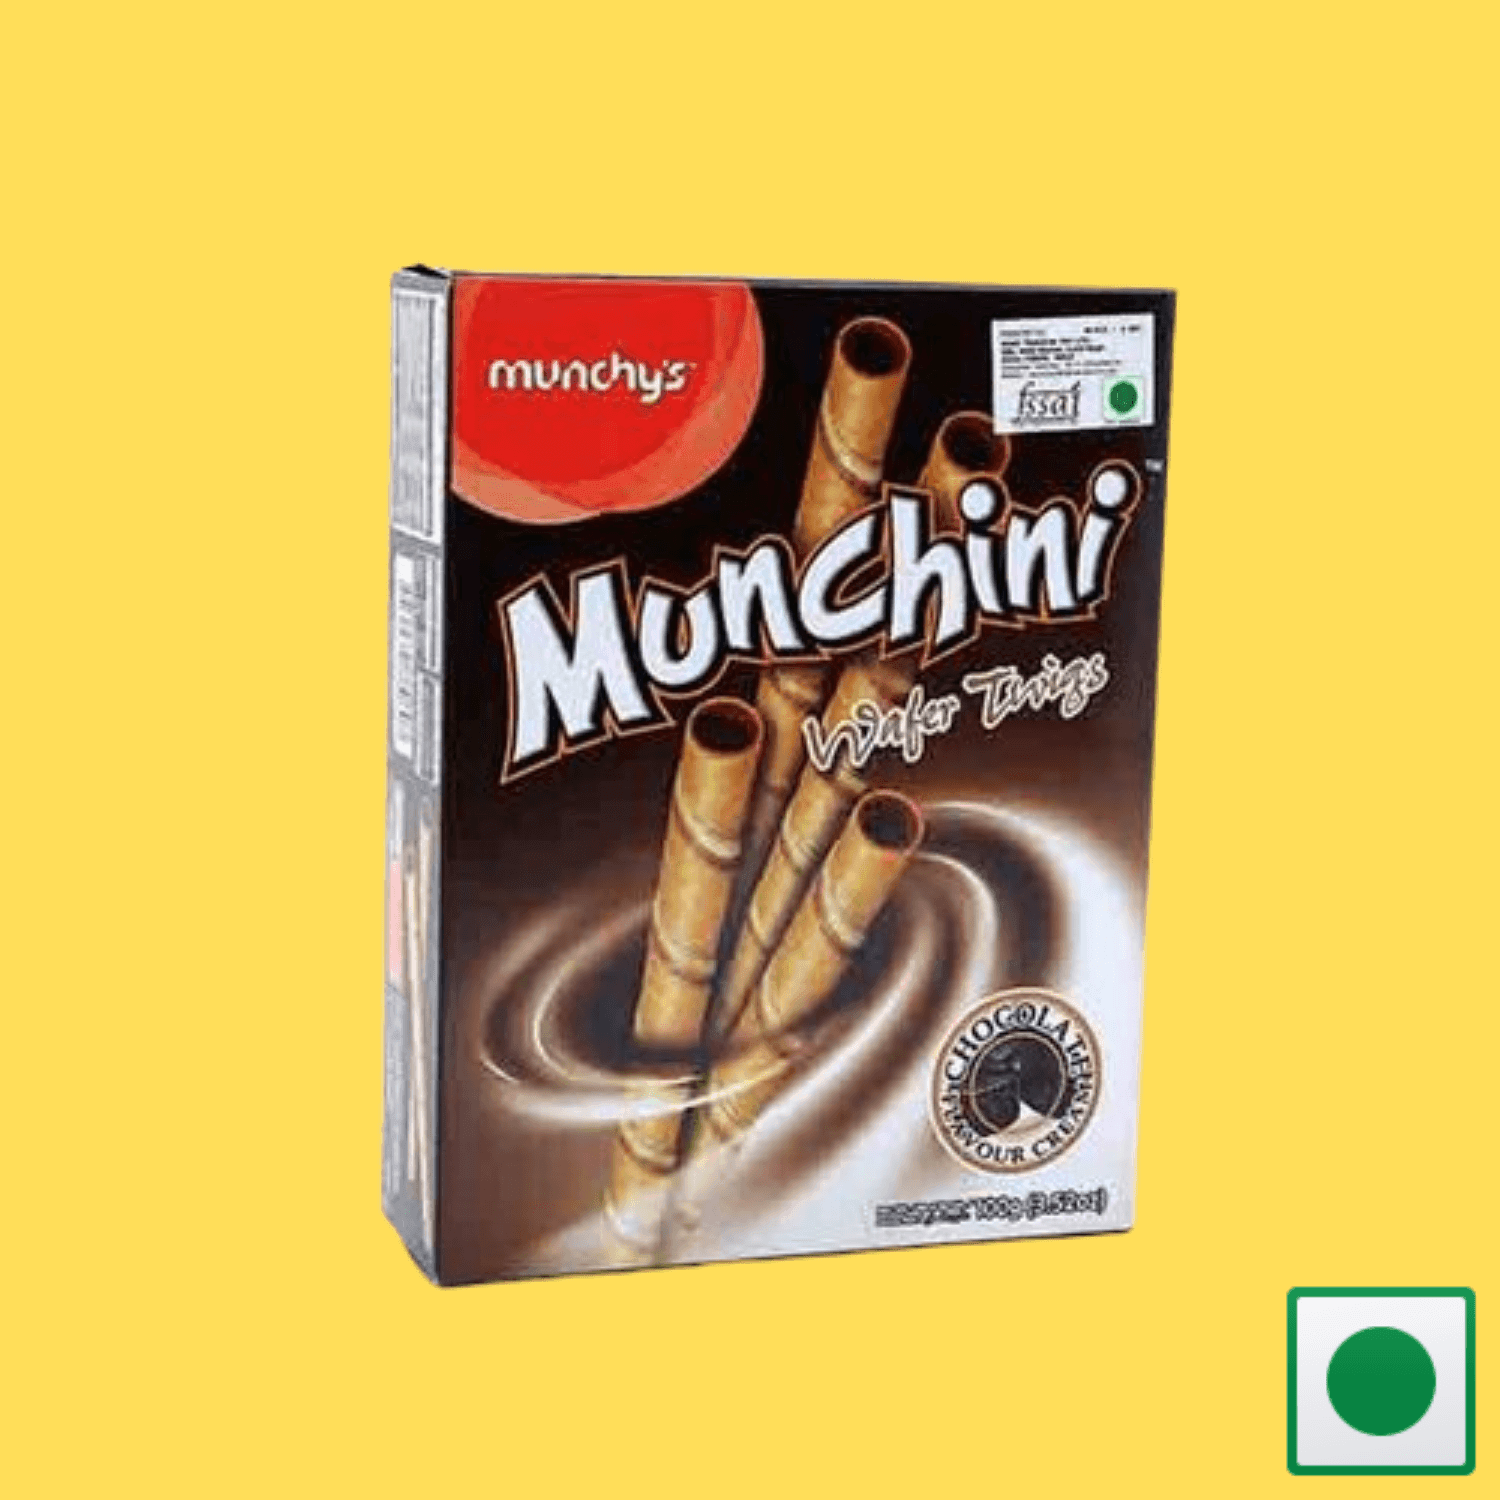 Munchy's Wafer Stick, Chocolate, 100g (IMPORTED) - Super 7 Mart